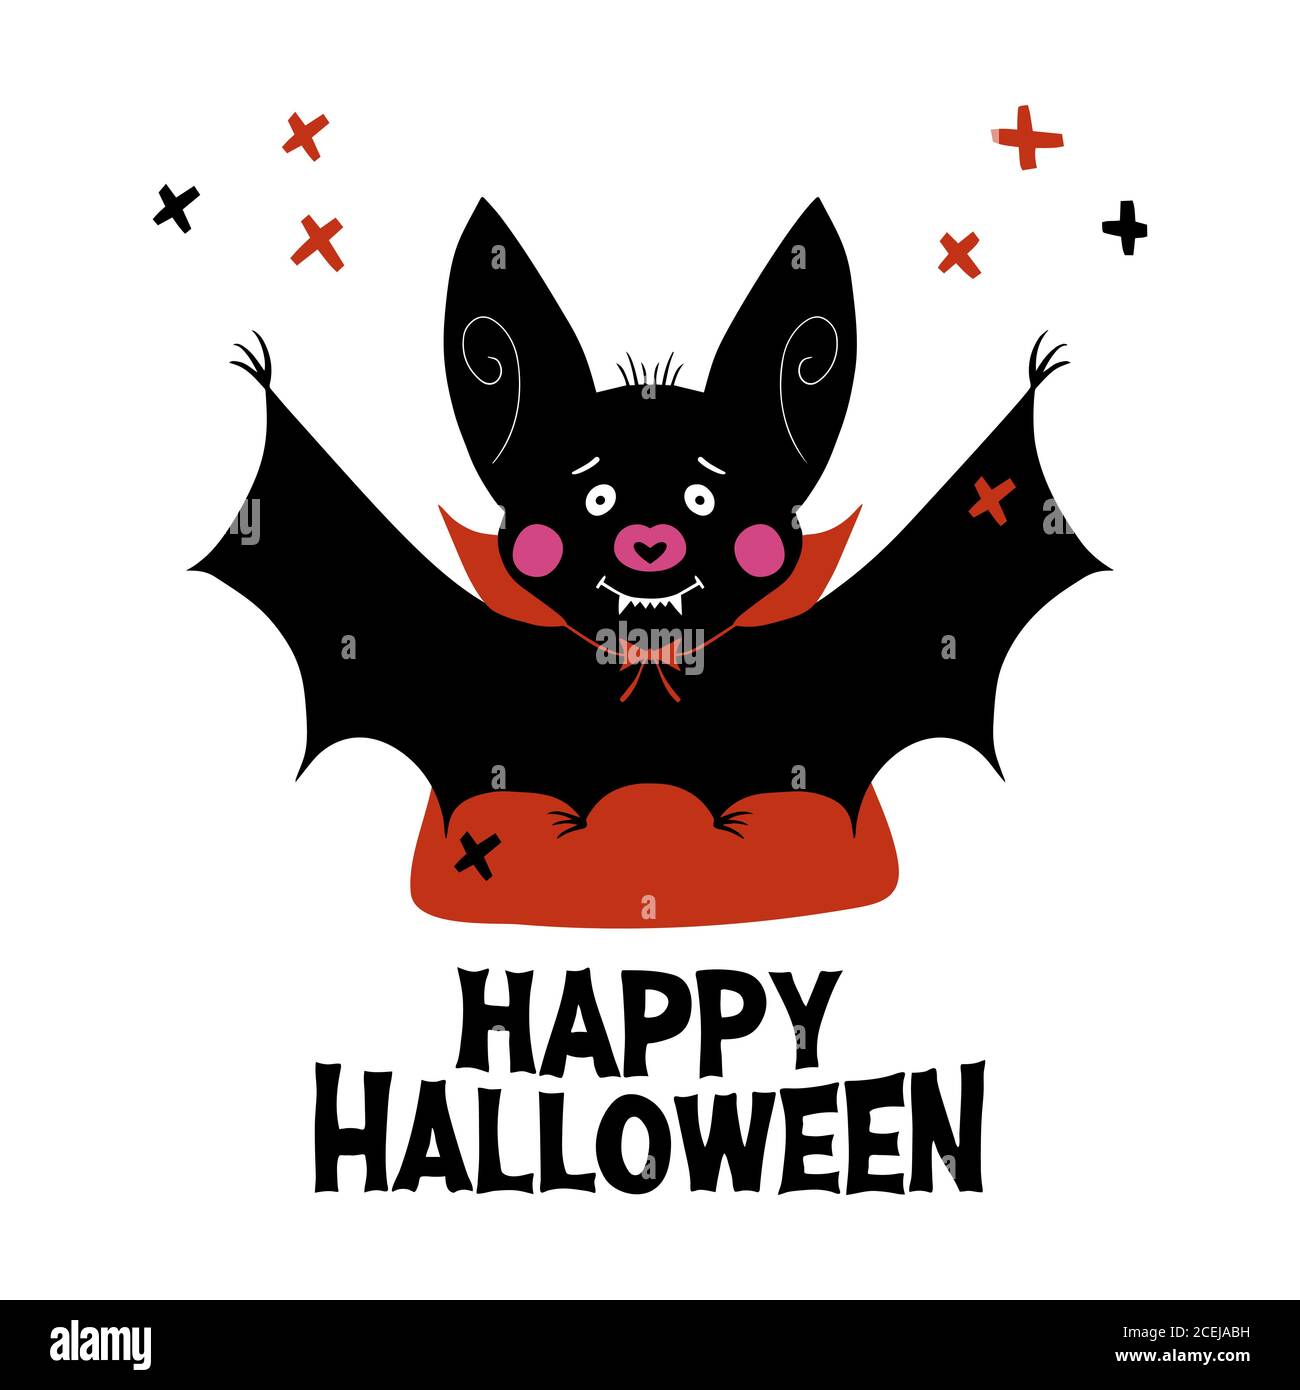 Cute cartoon vampire bat with fangs and red cloak. Doodle cross elements and happy halloween lettering. Halloween greeting card. Isolated on white Stock Vector